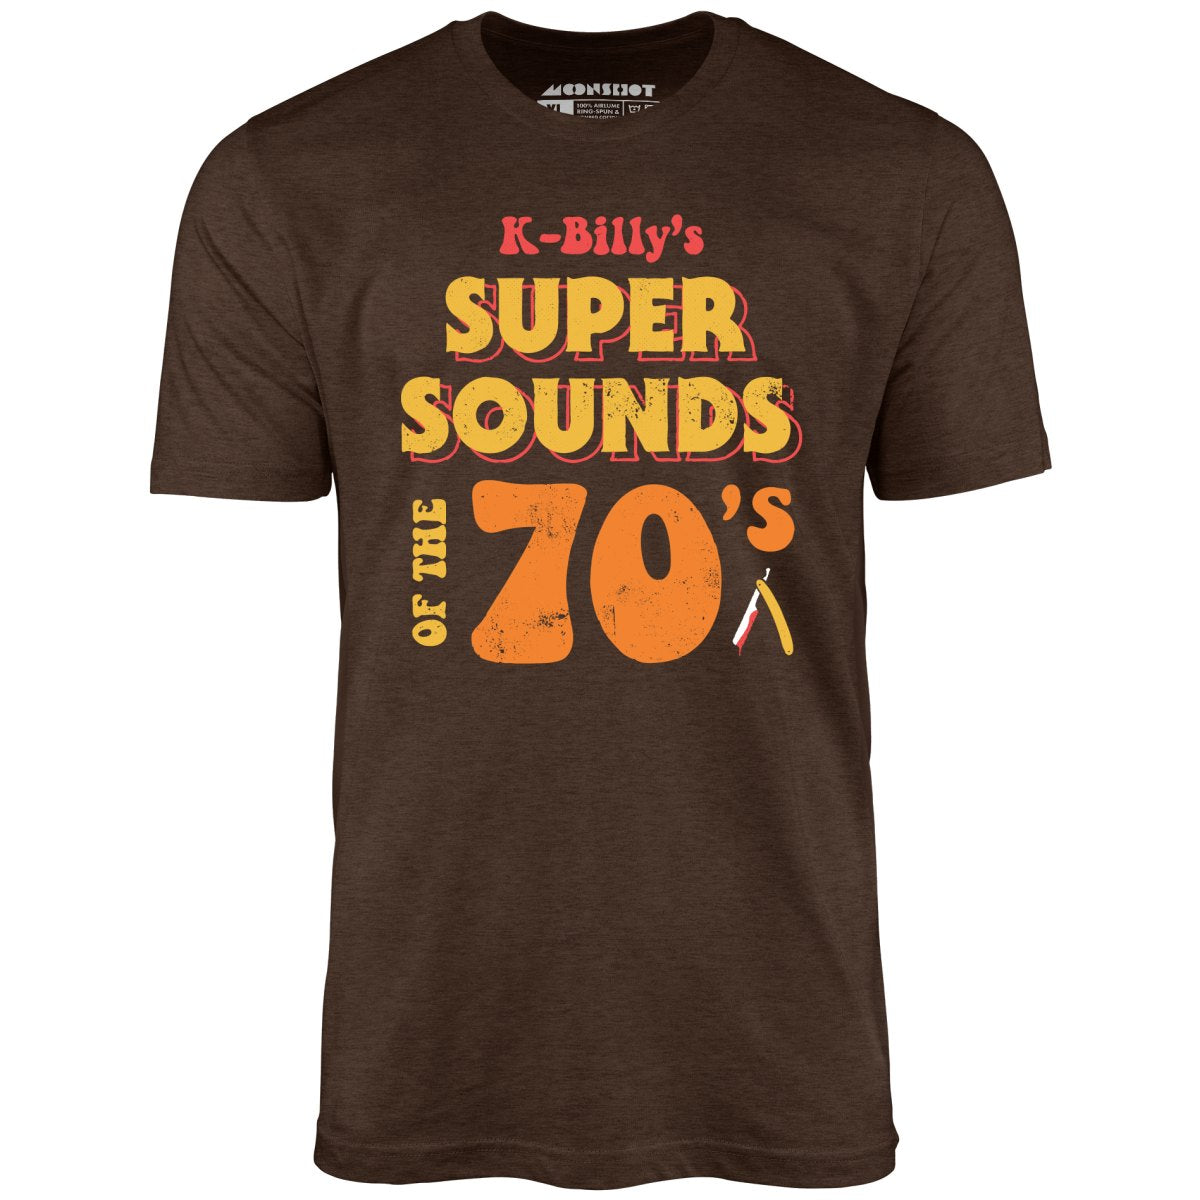 K-Billy's Super Sounds of the 70s - Unisex T-Shirt